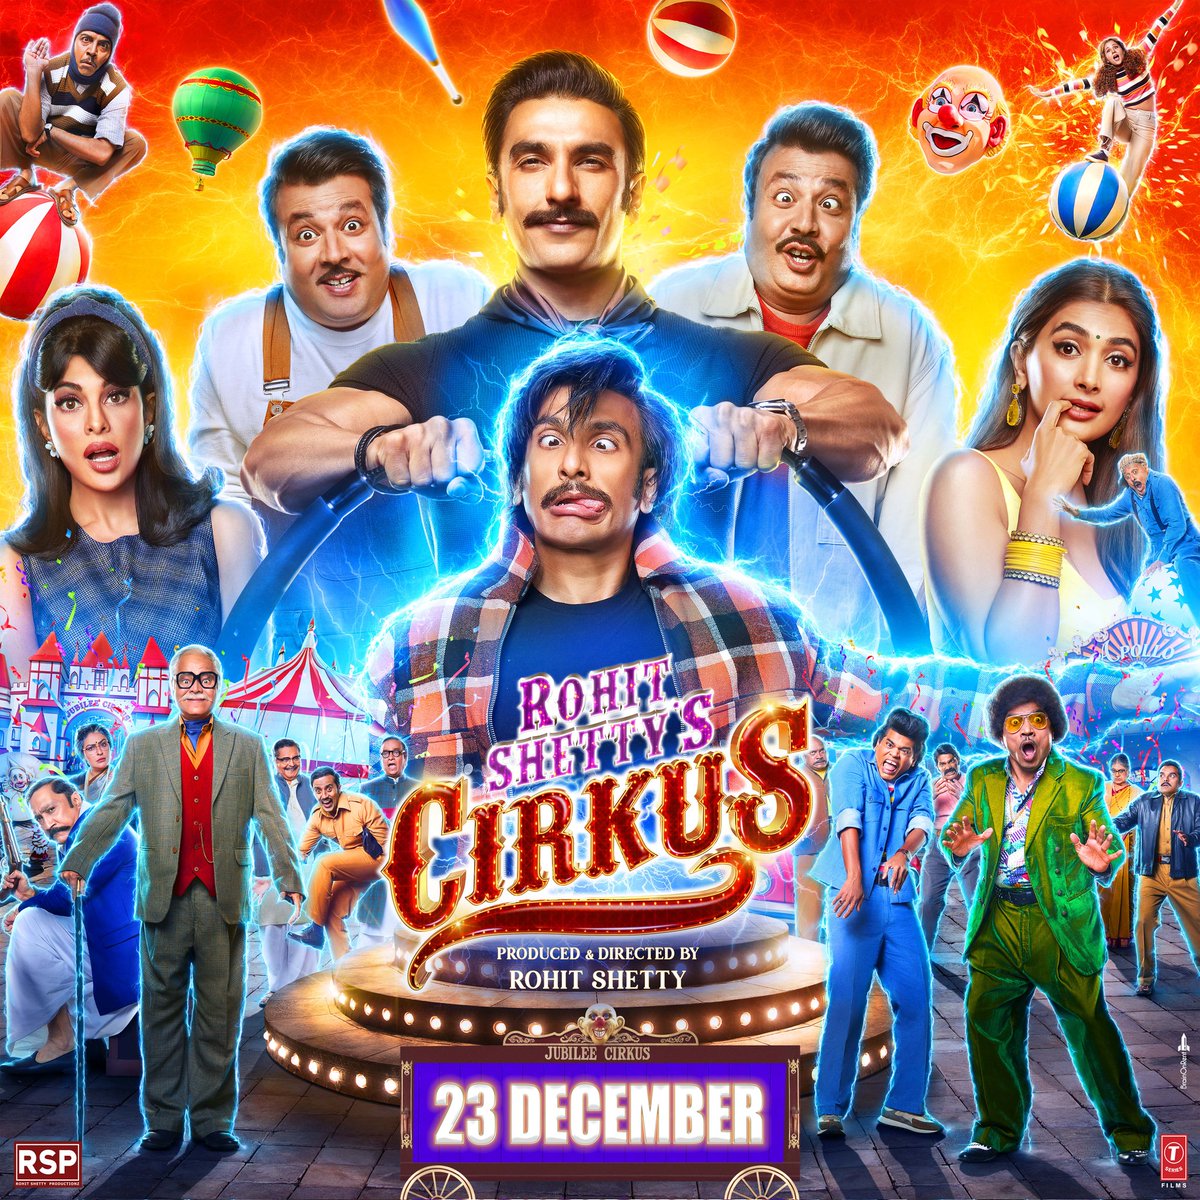 For your family... From your family members... Rohit shetty & team! #CirkusThisChristmas @TSeries